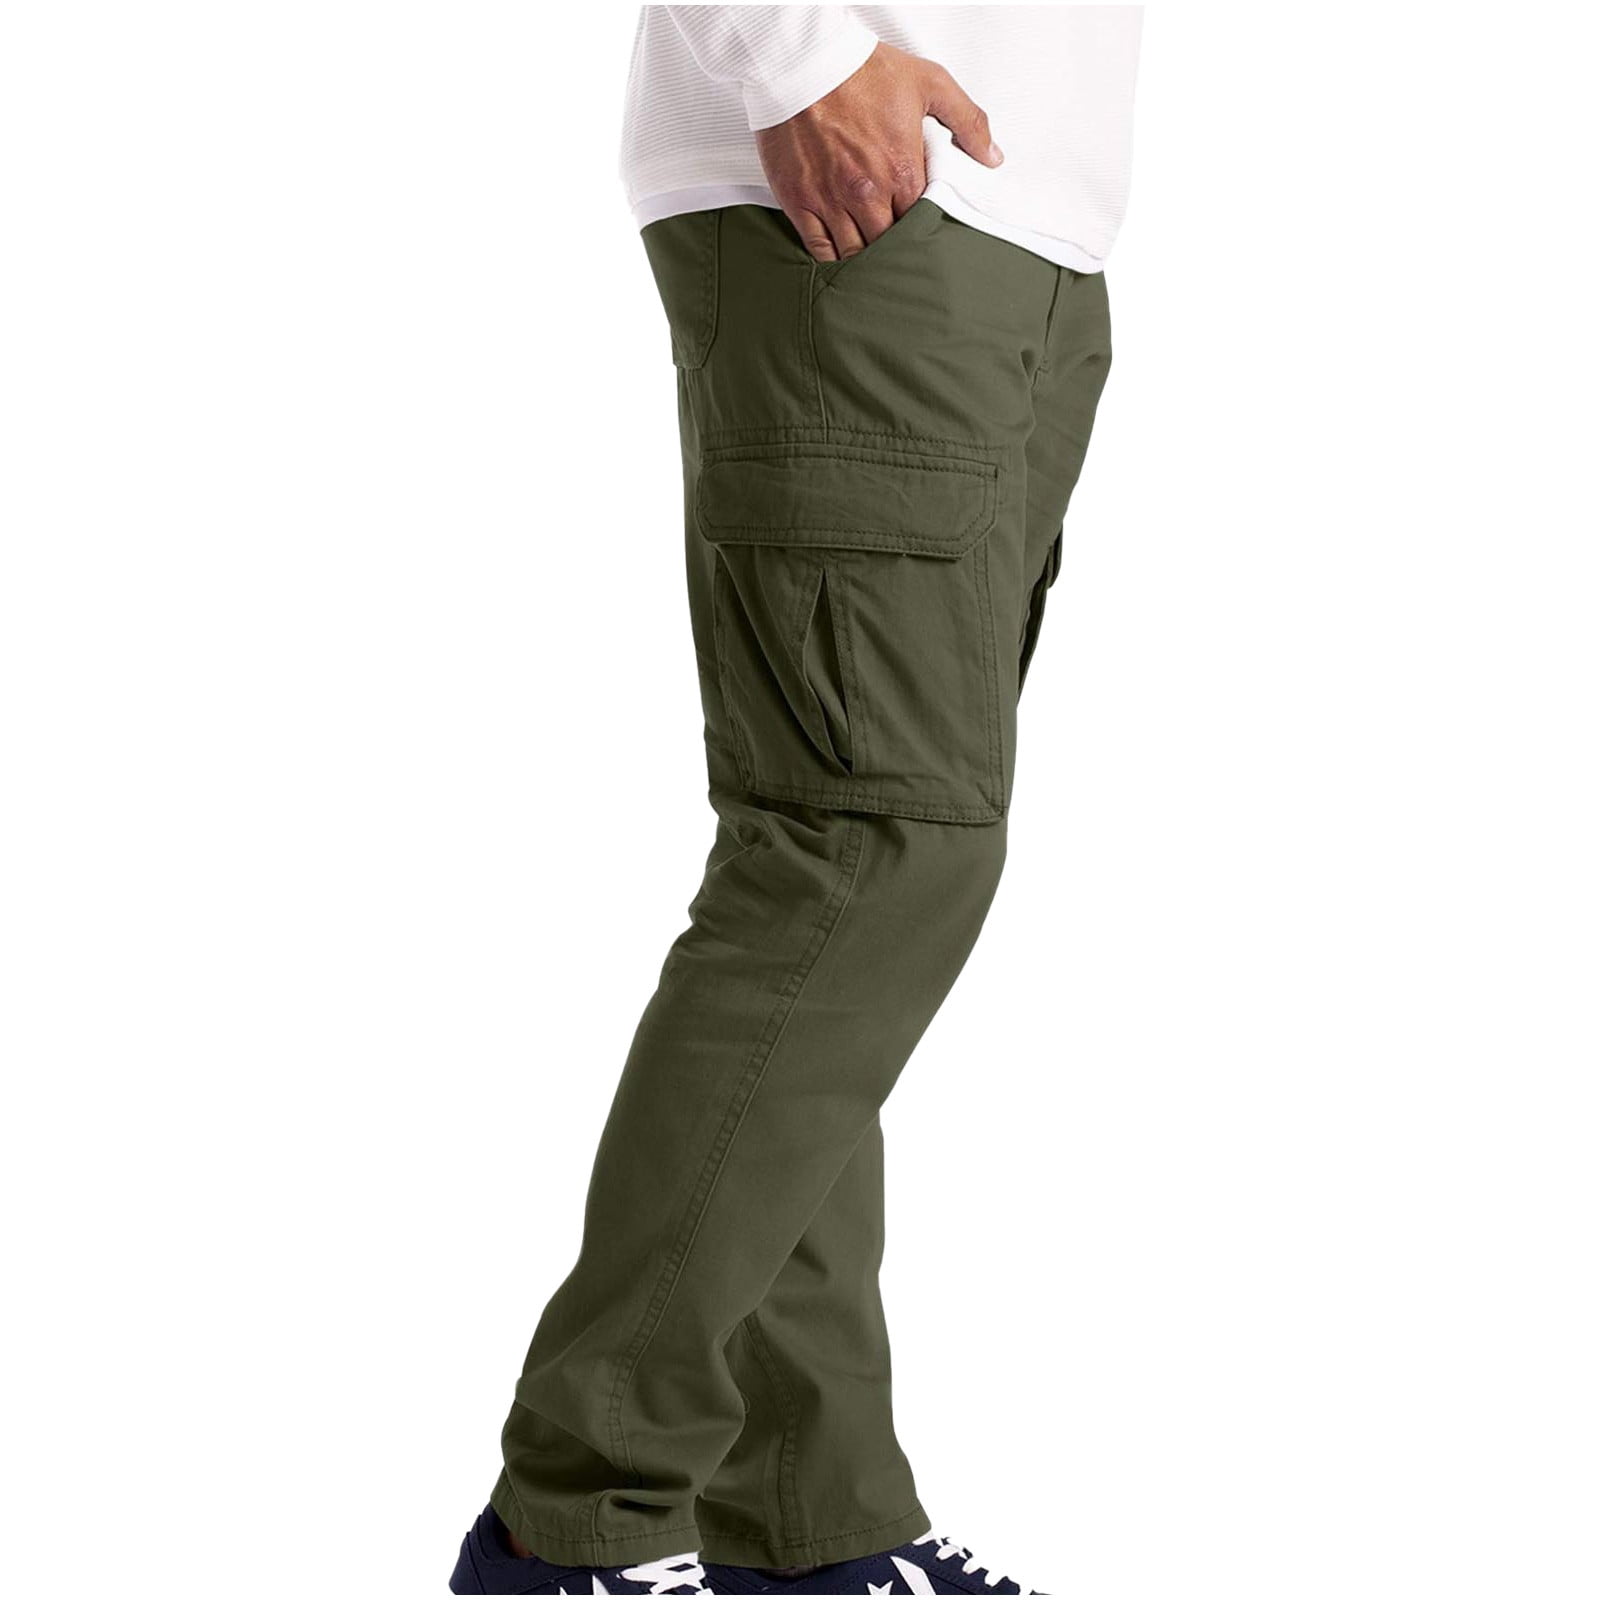 Men'S Cargo Trousers Work Wear Combat Safety Cargo 6 Pocket Full Pants Army  Green Xl g49